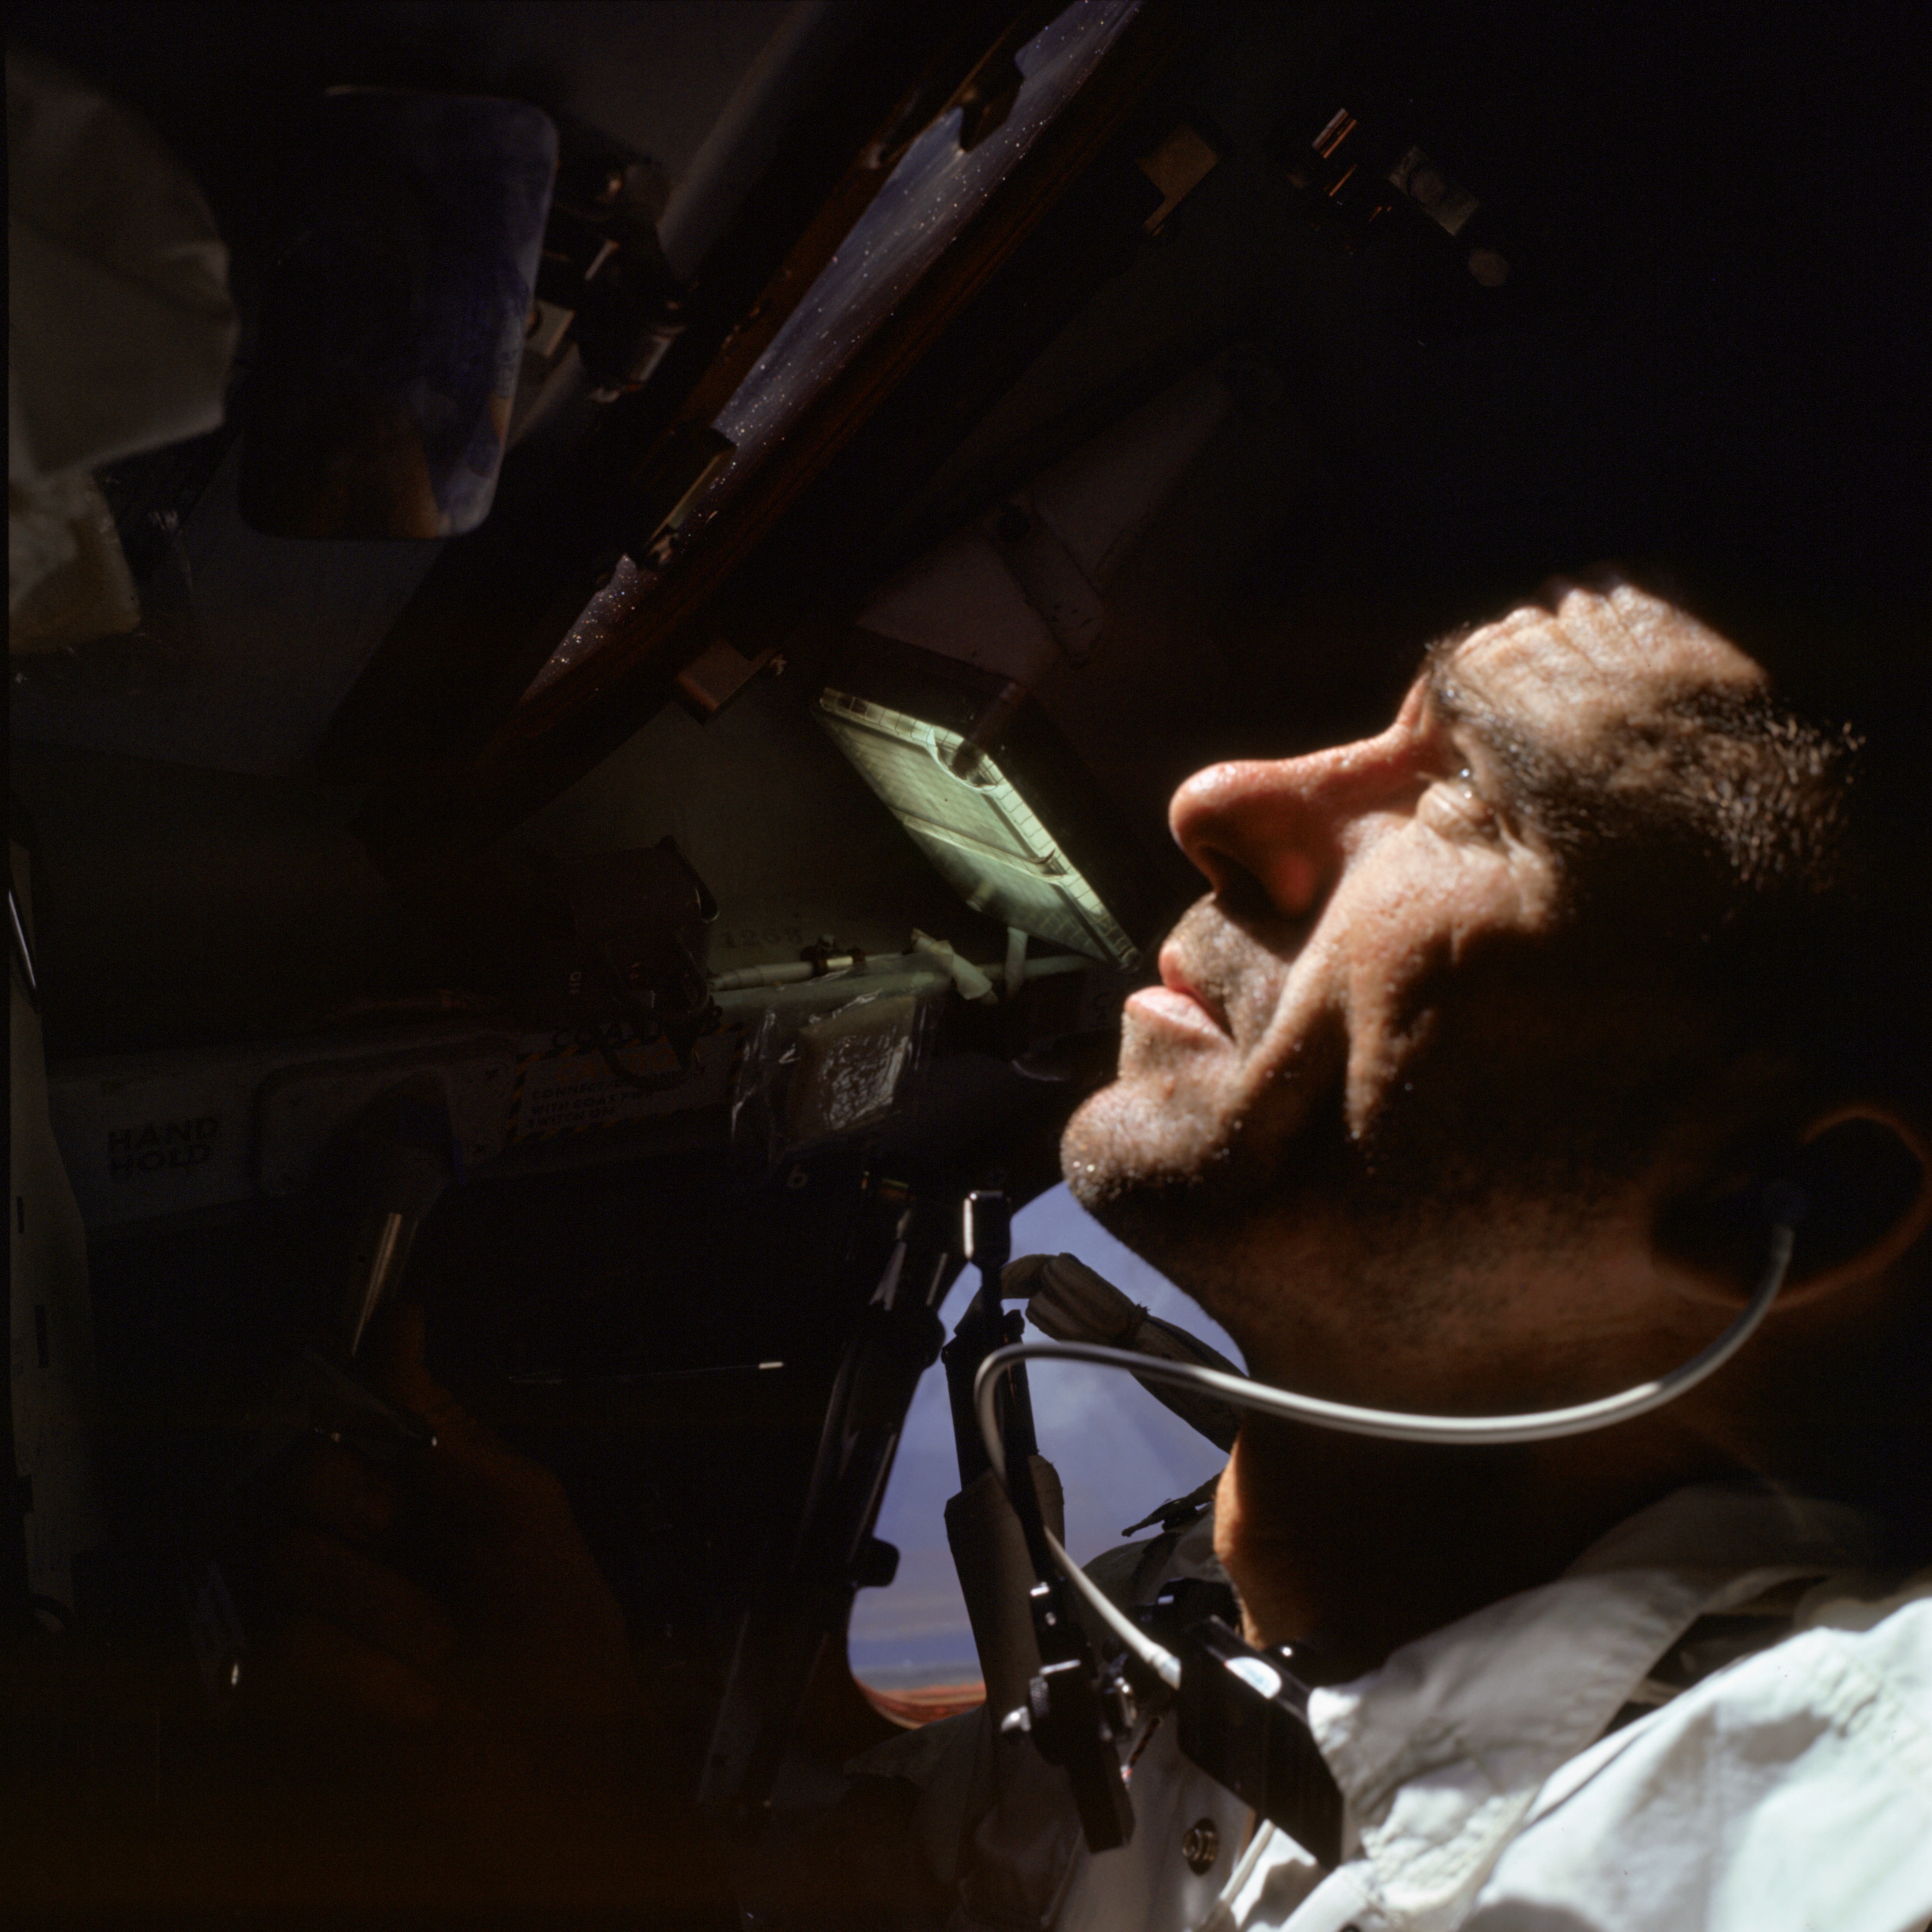 NASA astronaut Walter Cunningham during the Apollo 7 mission, on which he served in the lunar module pilot. October 1968.jpg